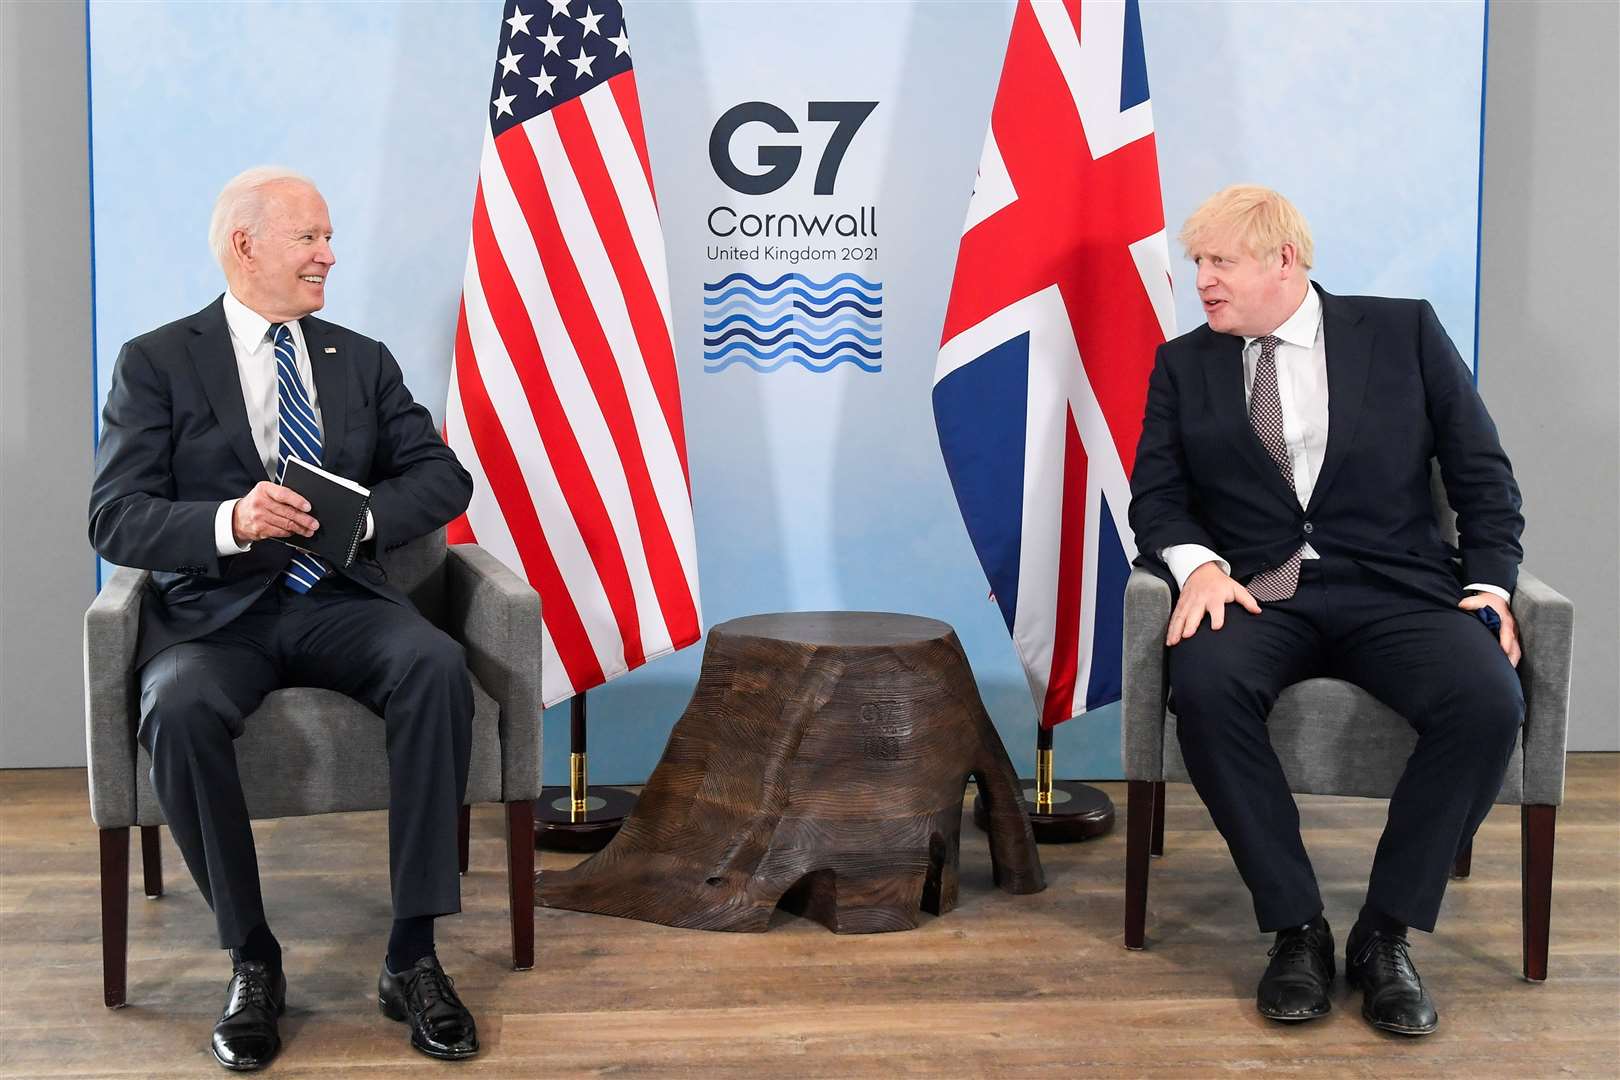 US President Joe Biden with Prime Minister Boris Johnson during their meeting at the G7 summit in Cornwall (Toby Melville/PA)